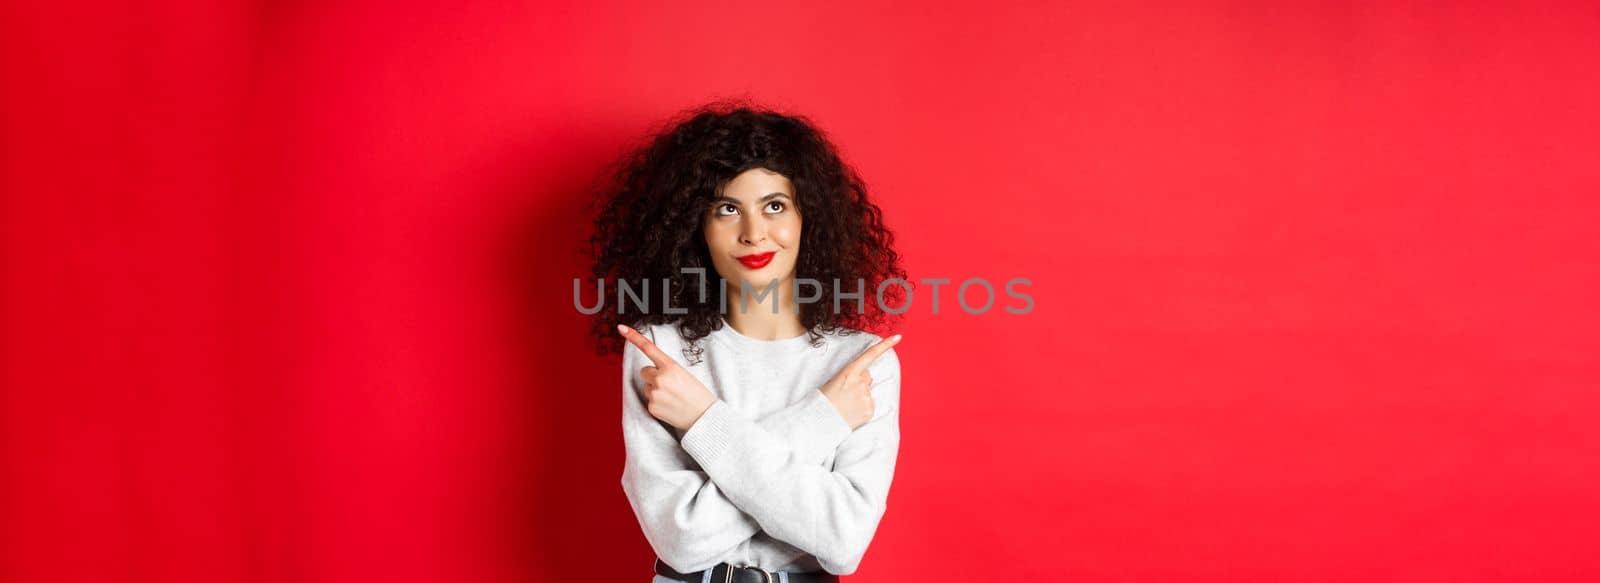 Pensive young woman making choice, pointing fingers sideways and looking at upper left corner with confident face, standing on red background.